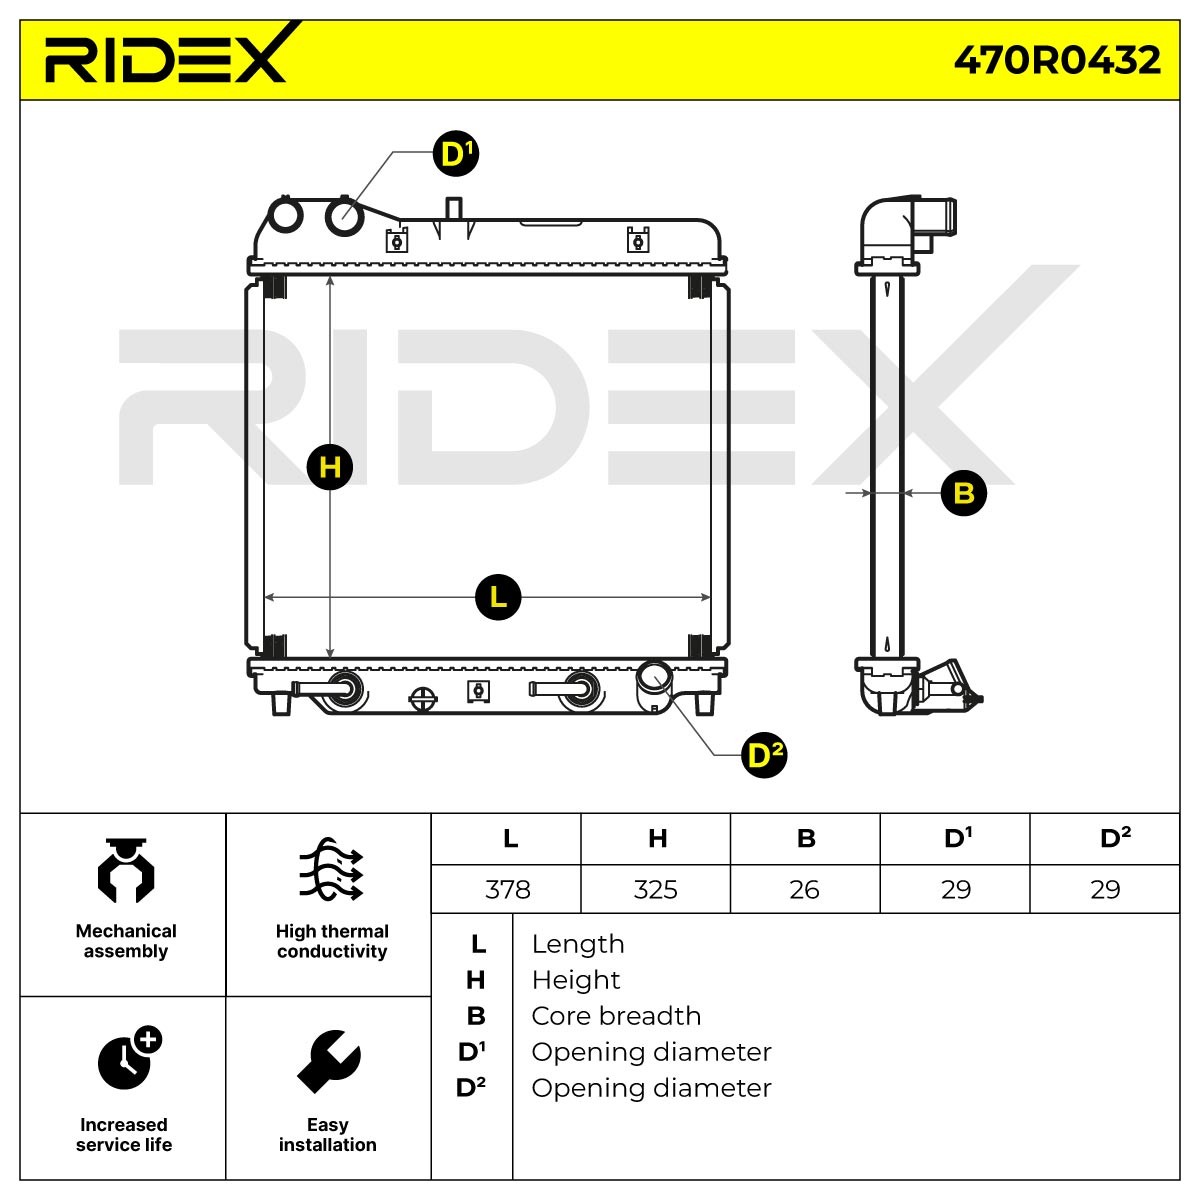 470R0432 Radiator 470R0432 RIDEX Aluminium, for vehicles with air conditioning, 628 x 378 x 34 mm, Manual Transmission, Brazed cooling fins